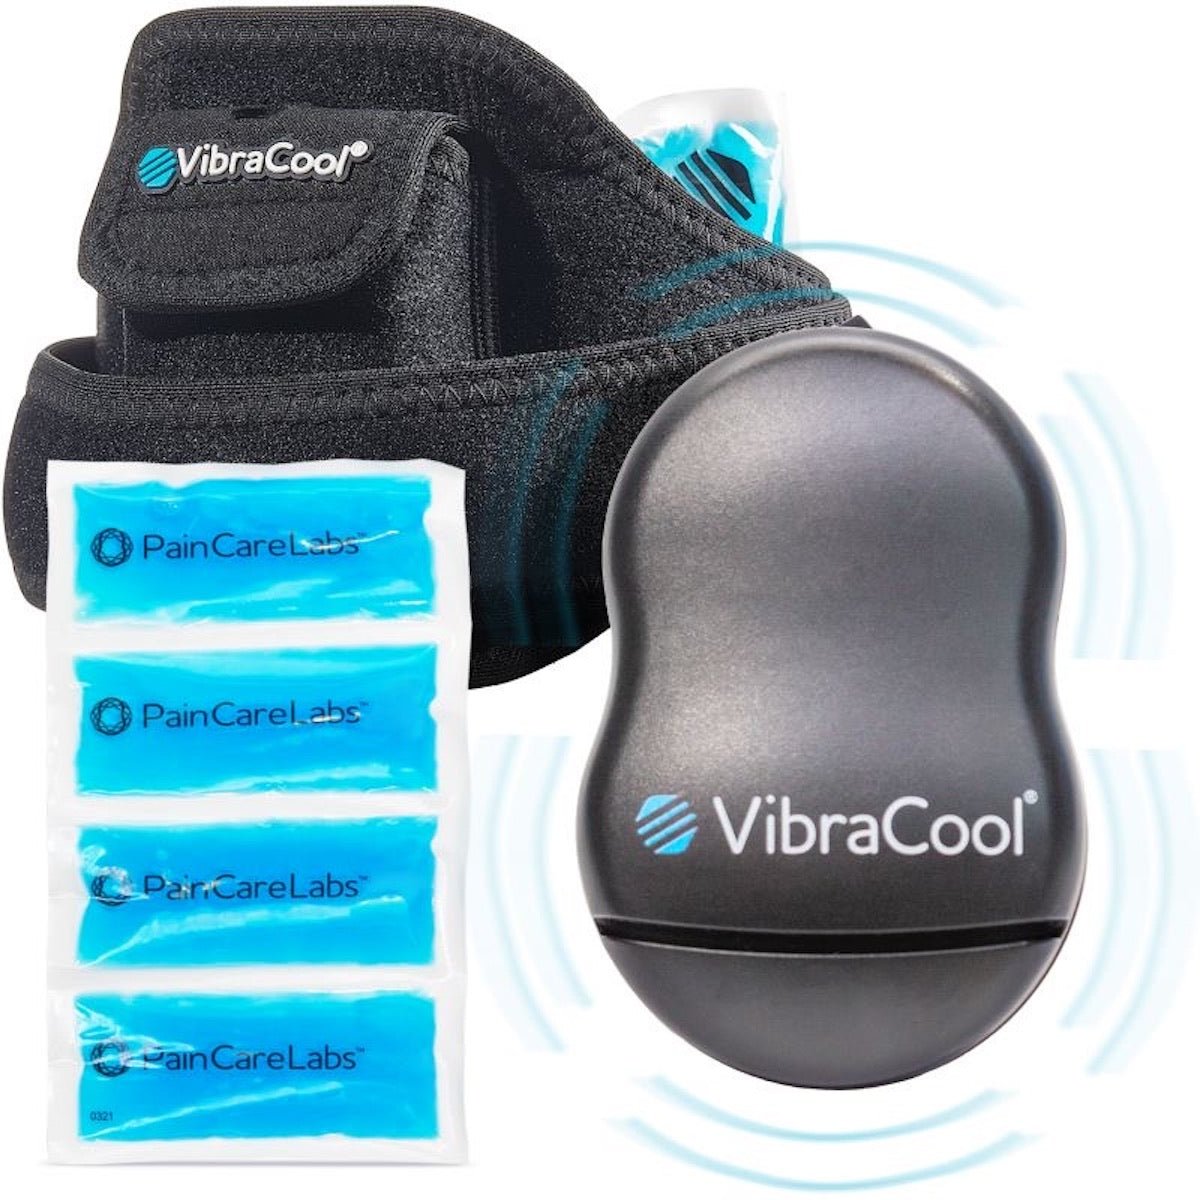 Vibracool Extended Fit Innovative Injury Soothing Pain Reliever